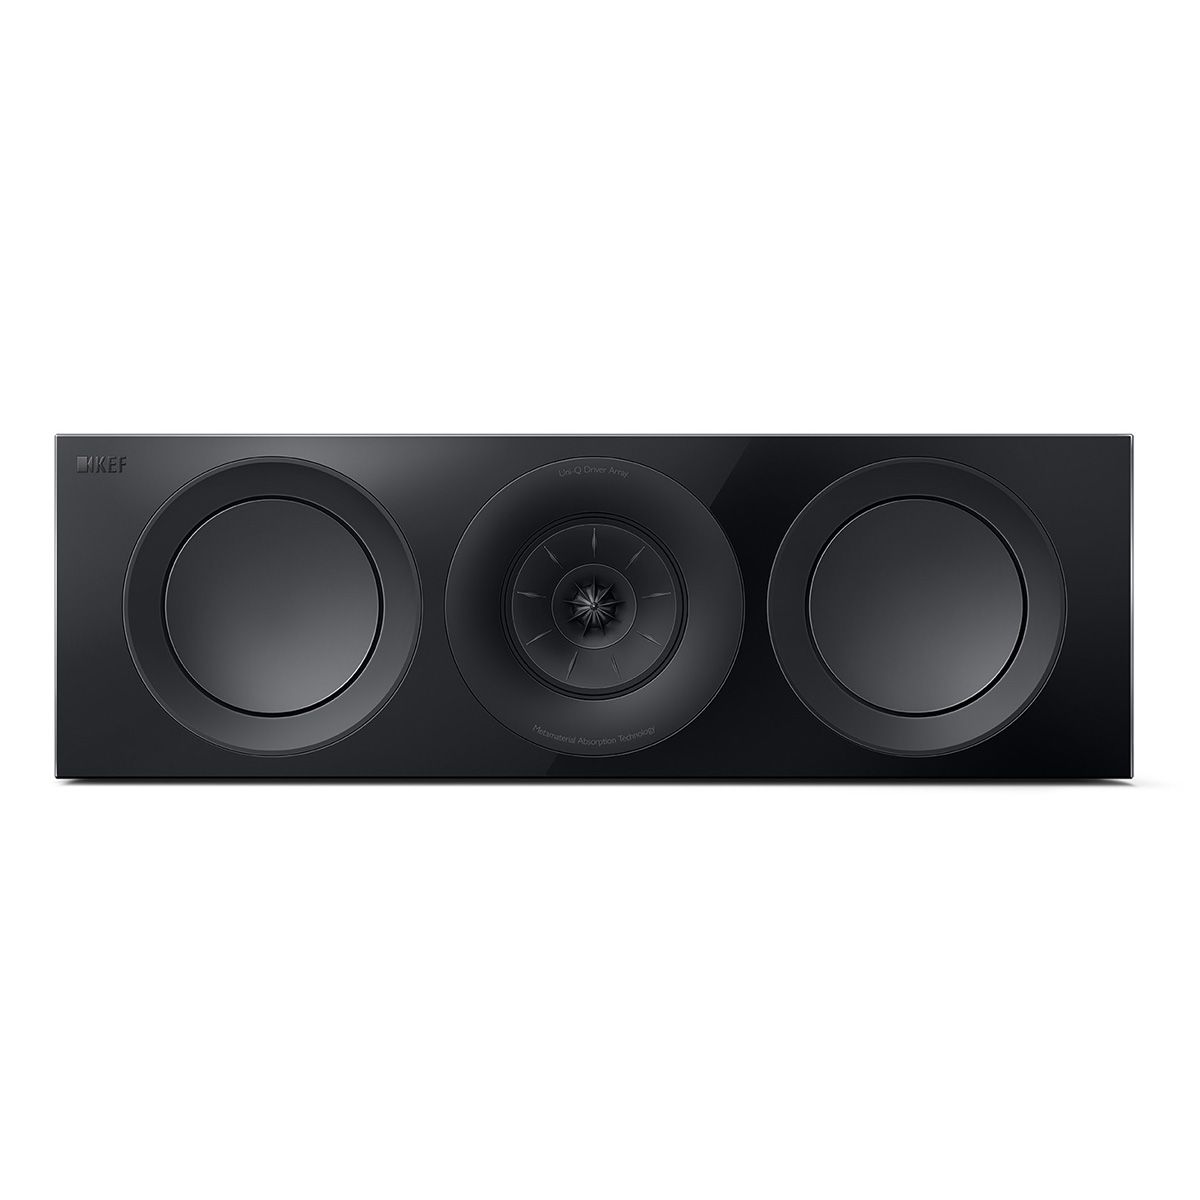 KEF R6 Meta LCR Speaker - Each black front view without grille